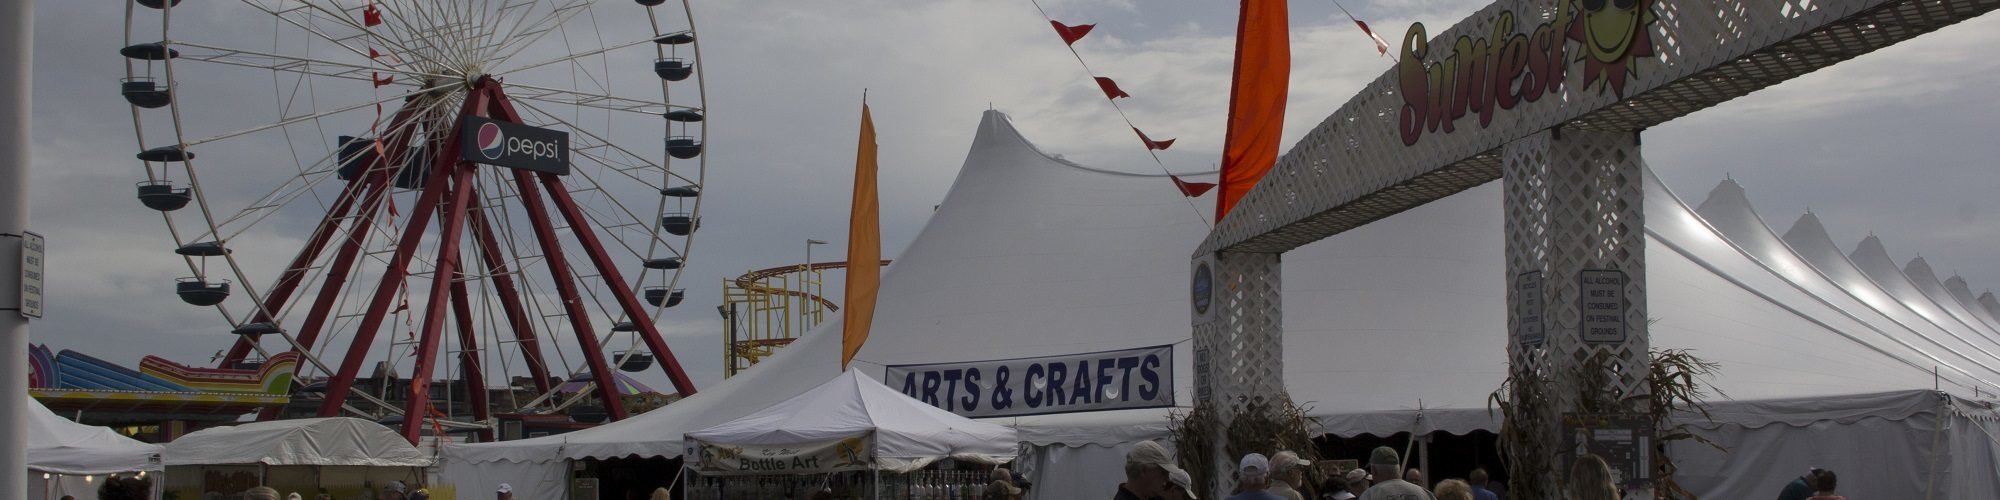 sunfest festival in ocean vity with arts and crafts tent and Ferris wheel